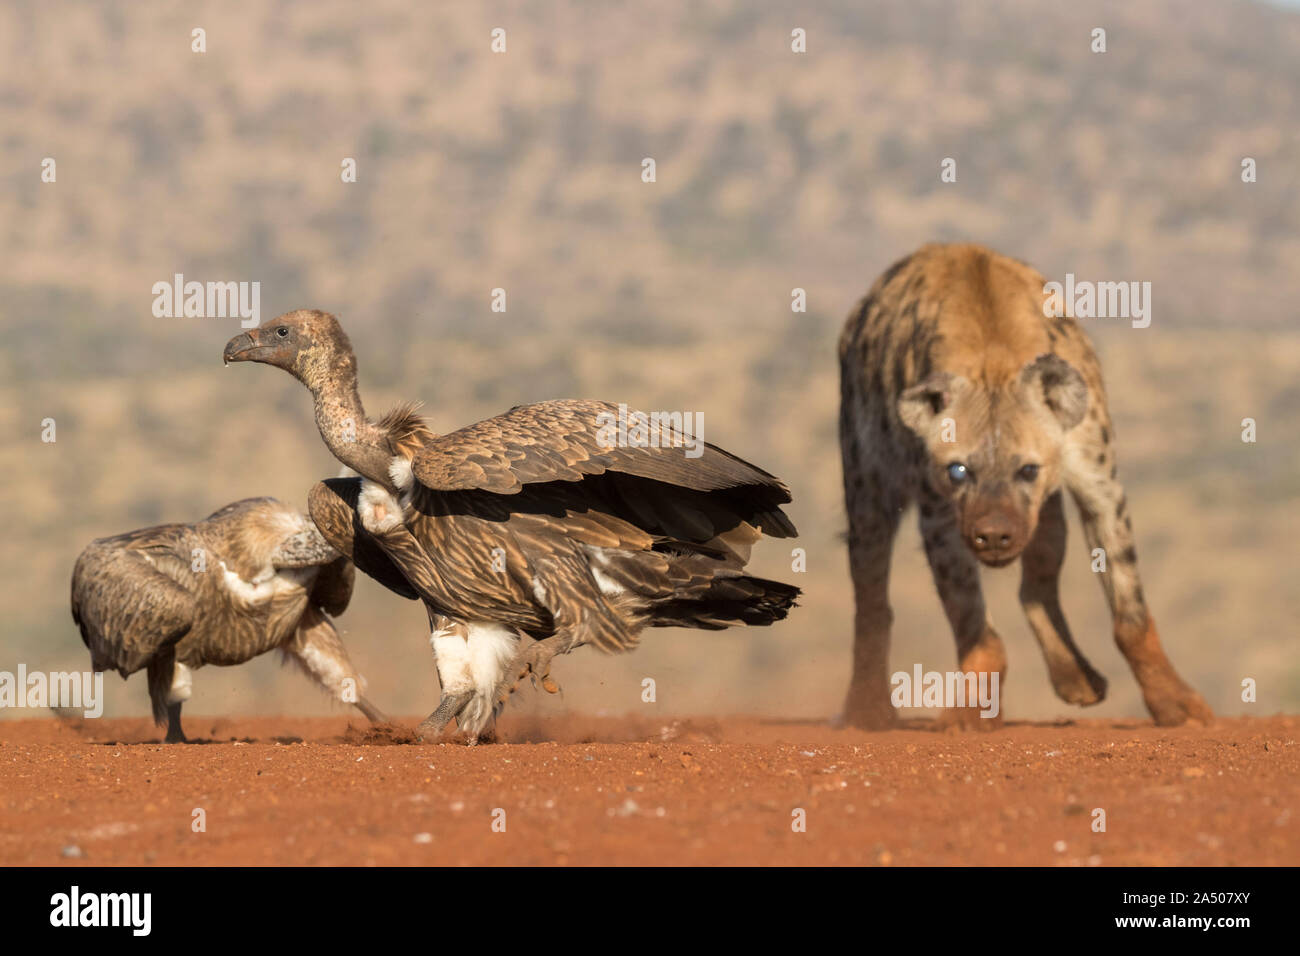 Whitebacked vulture (Gyps africanus) chased by spotted hyena, Zimanga private game reserve, KwaZulu-Natal, South Africa Stock Photo